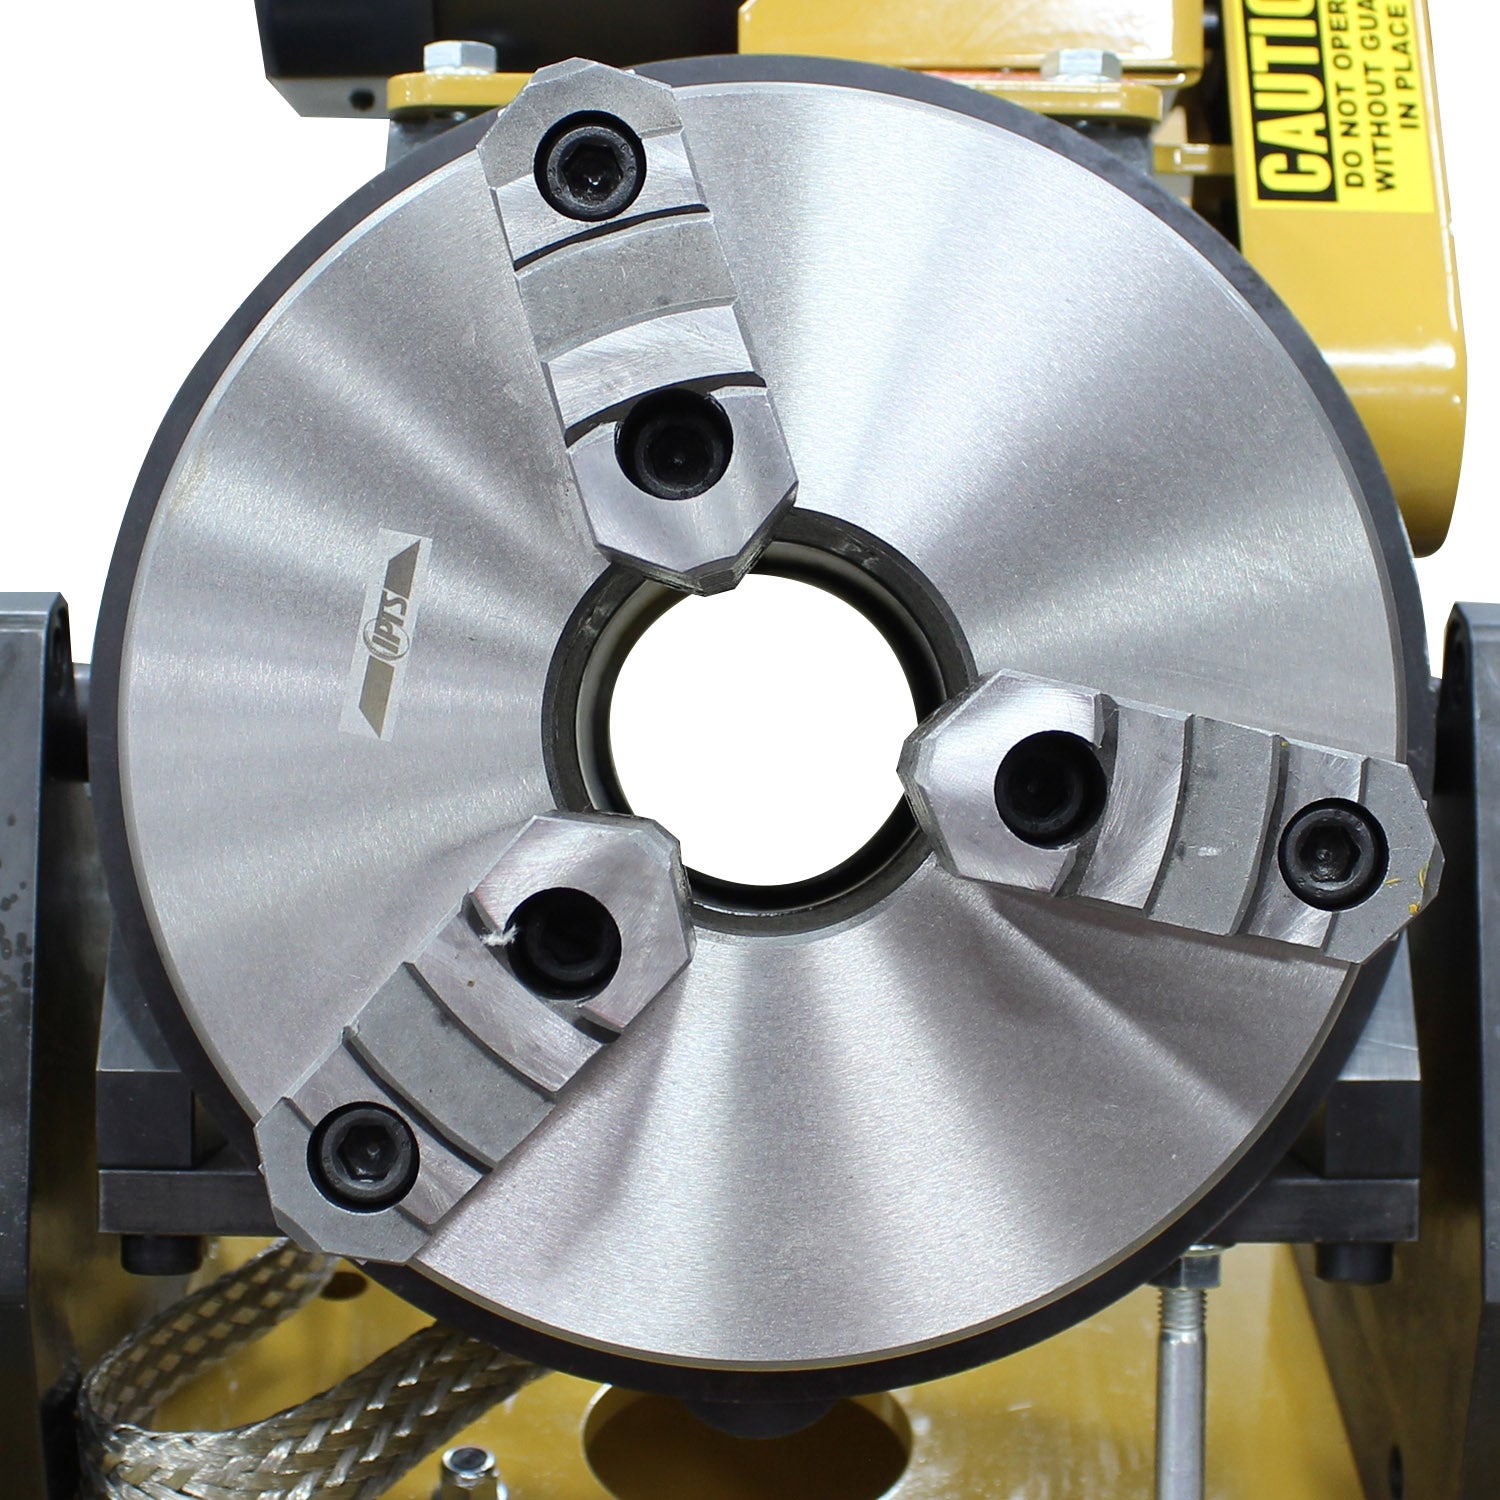 Baileigh WP-1800F Welding Positioner, 8" 3-jaw chuck with 2-3/8" Through Hole, Cart Mounted